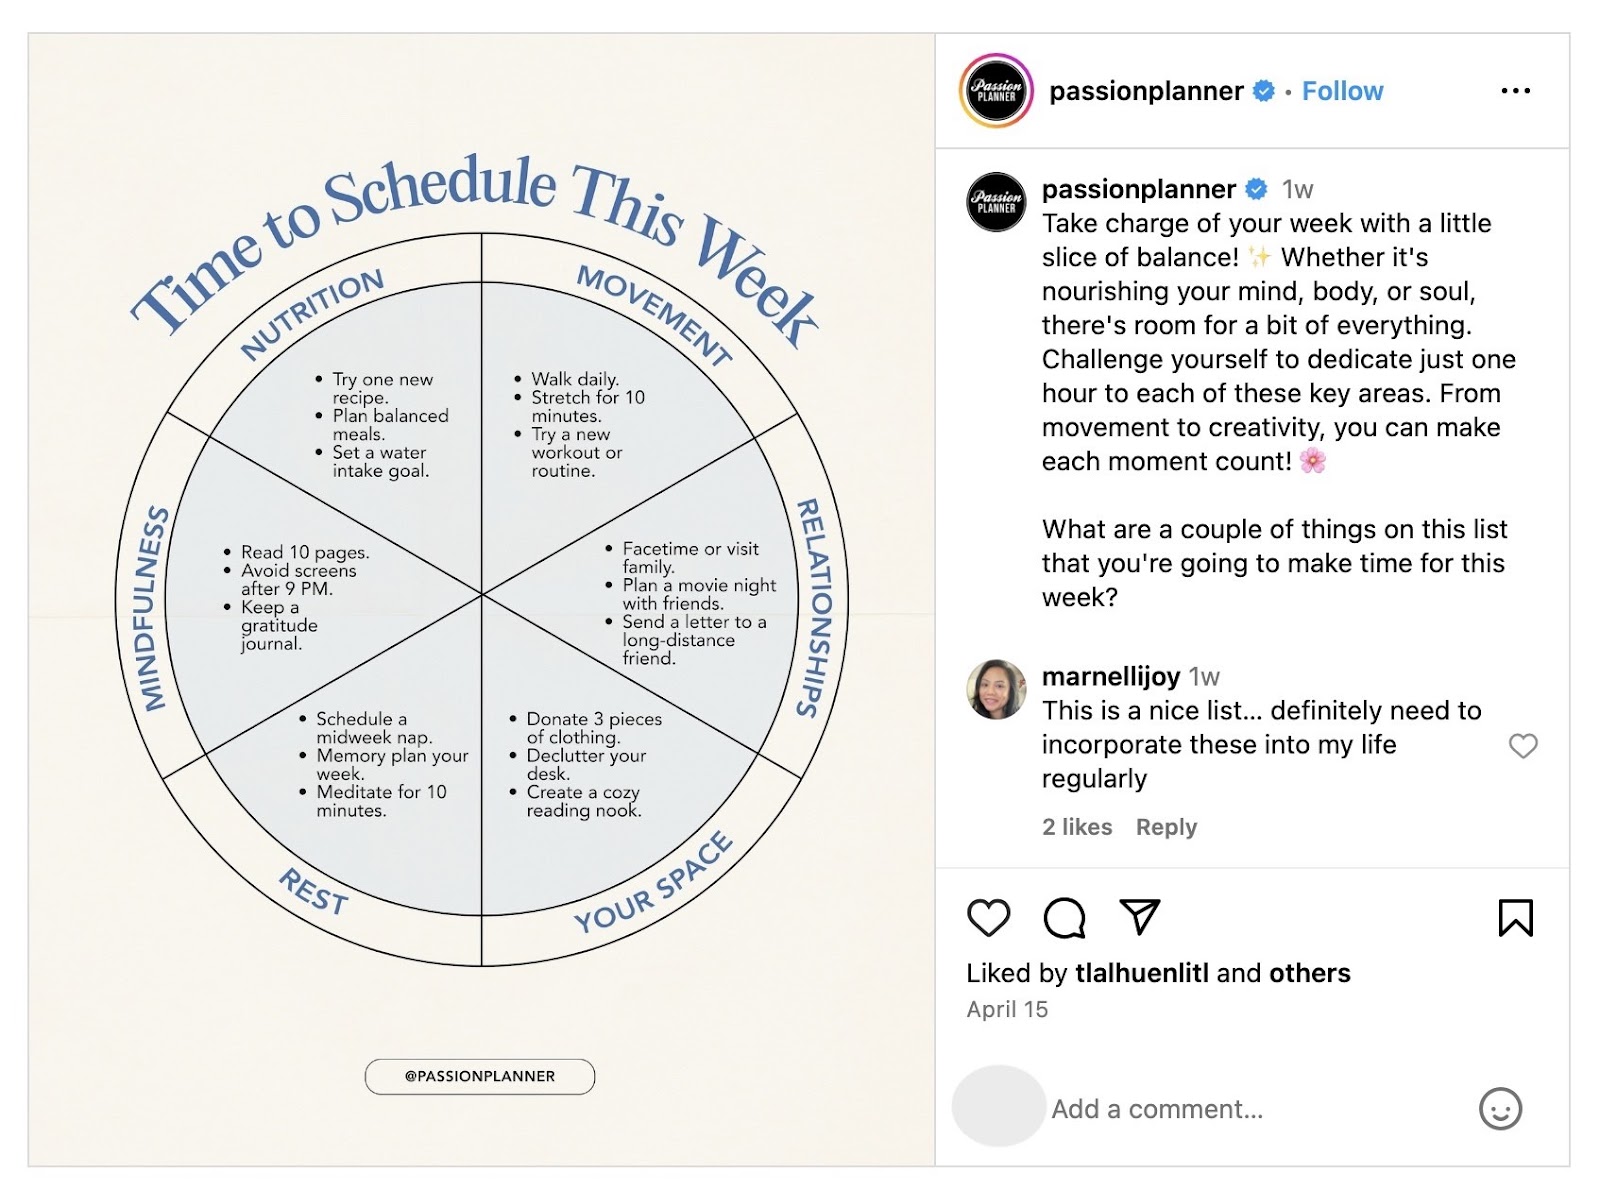 Post connected  Instagram by 'Passion Planner' with acquisition  contented  that helps program  and docket   the week's activities.